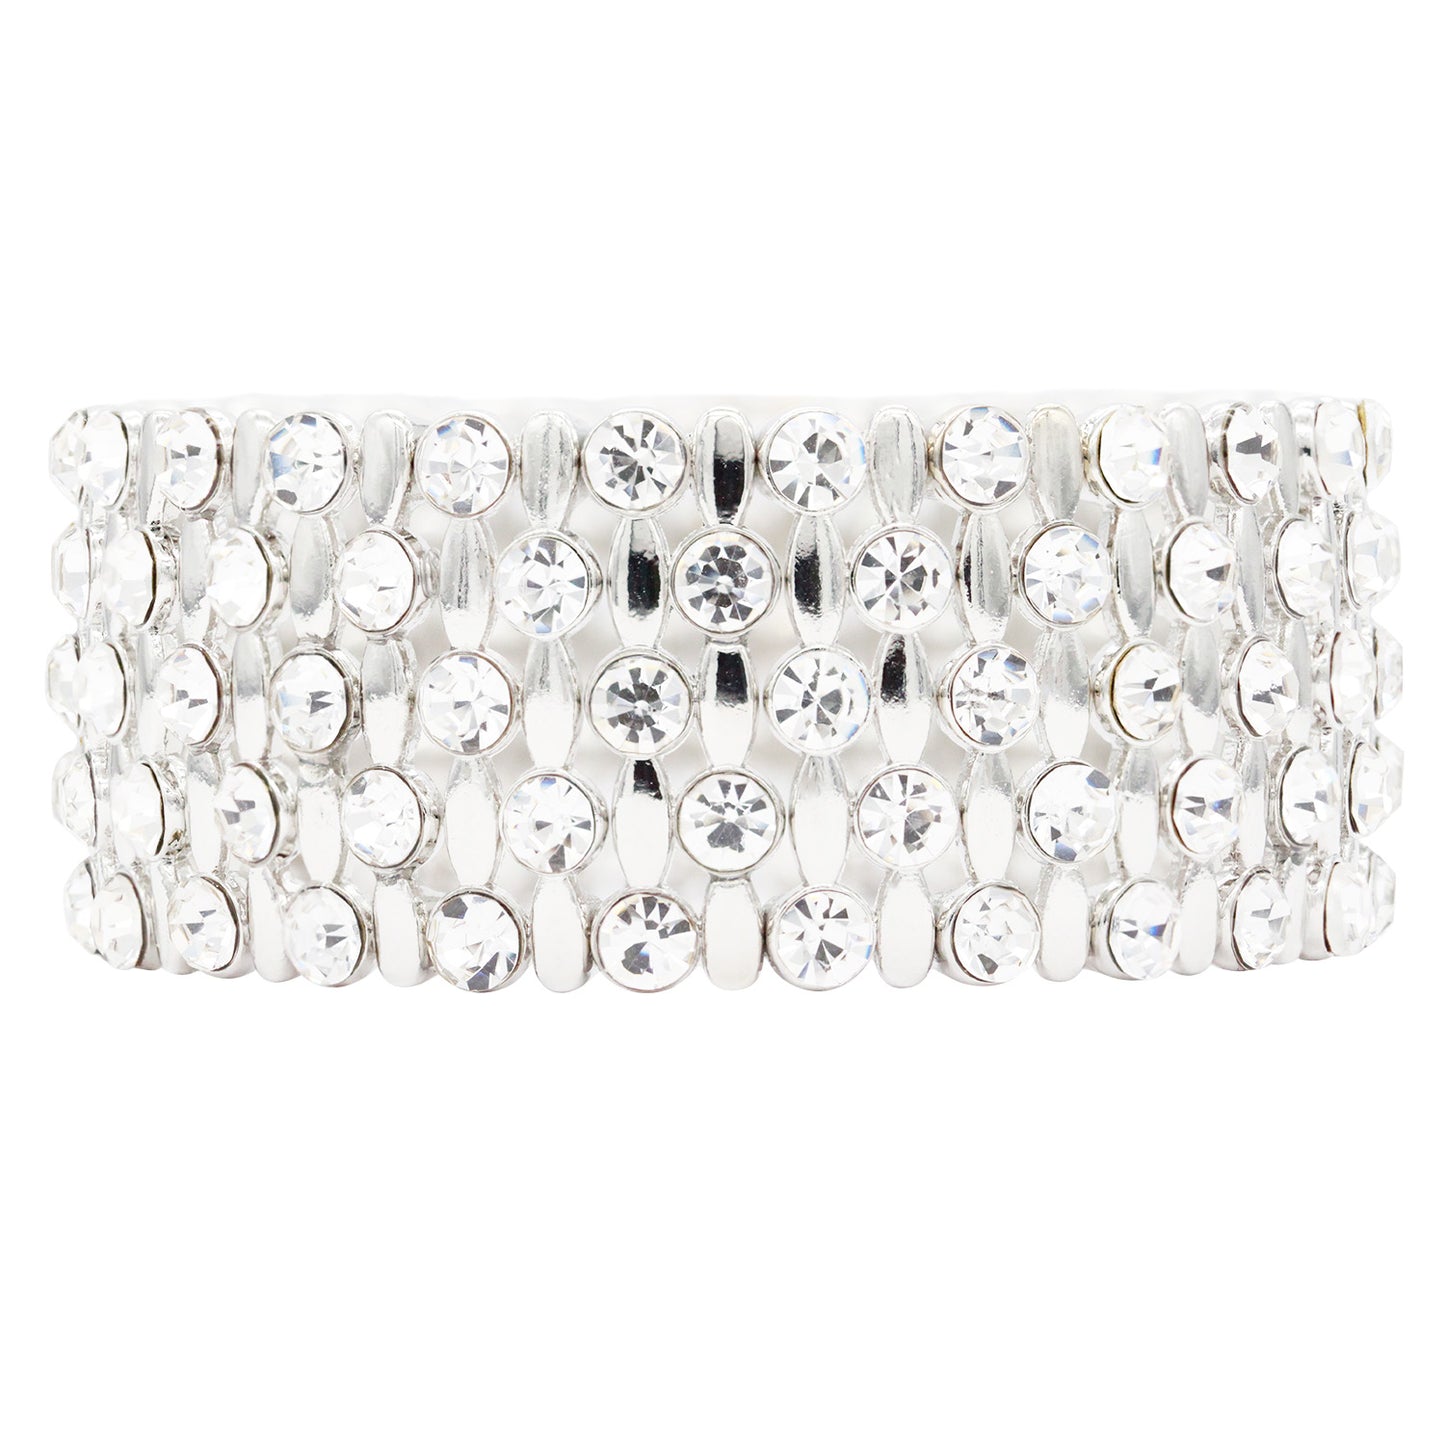 Lavencious Classic Design Elastic Stretch Bracelet Paved with Rhinestones Bridal Wedding Jewelry for Women 7"(Silver)